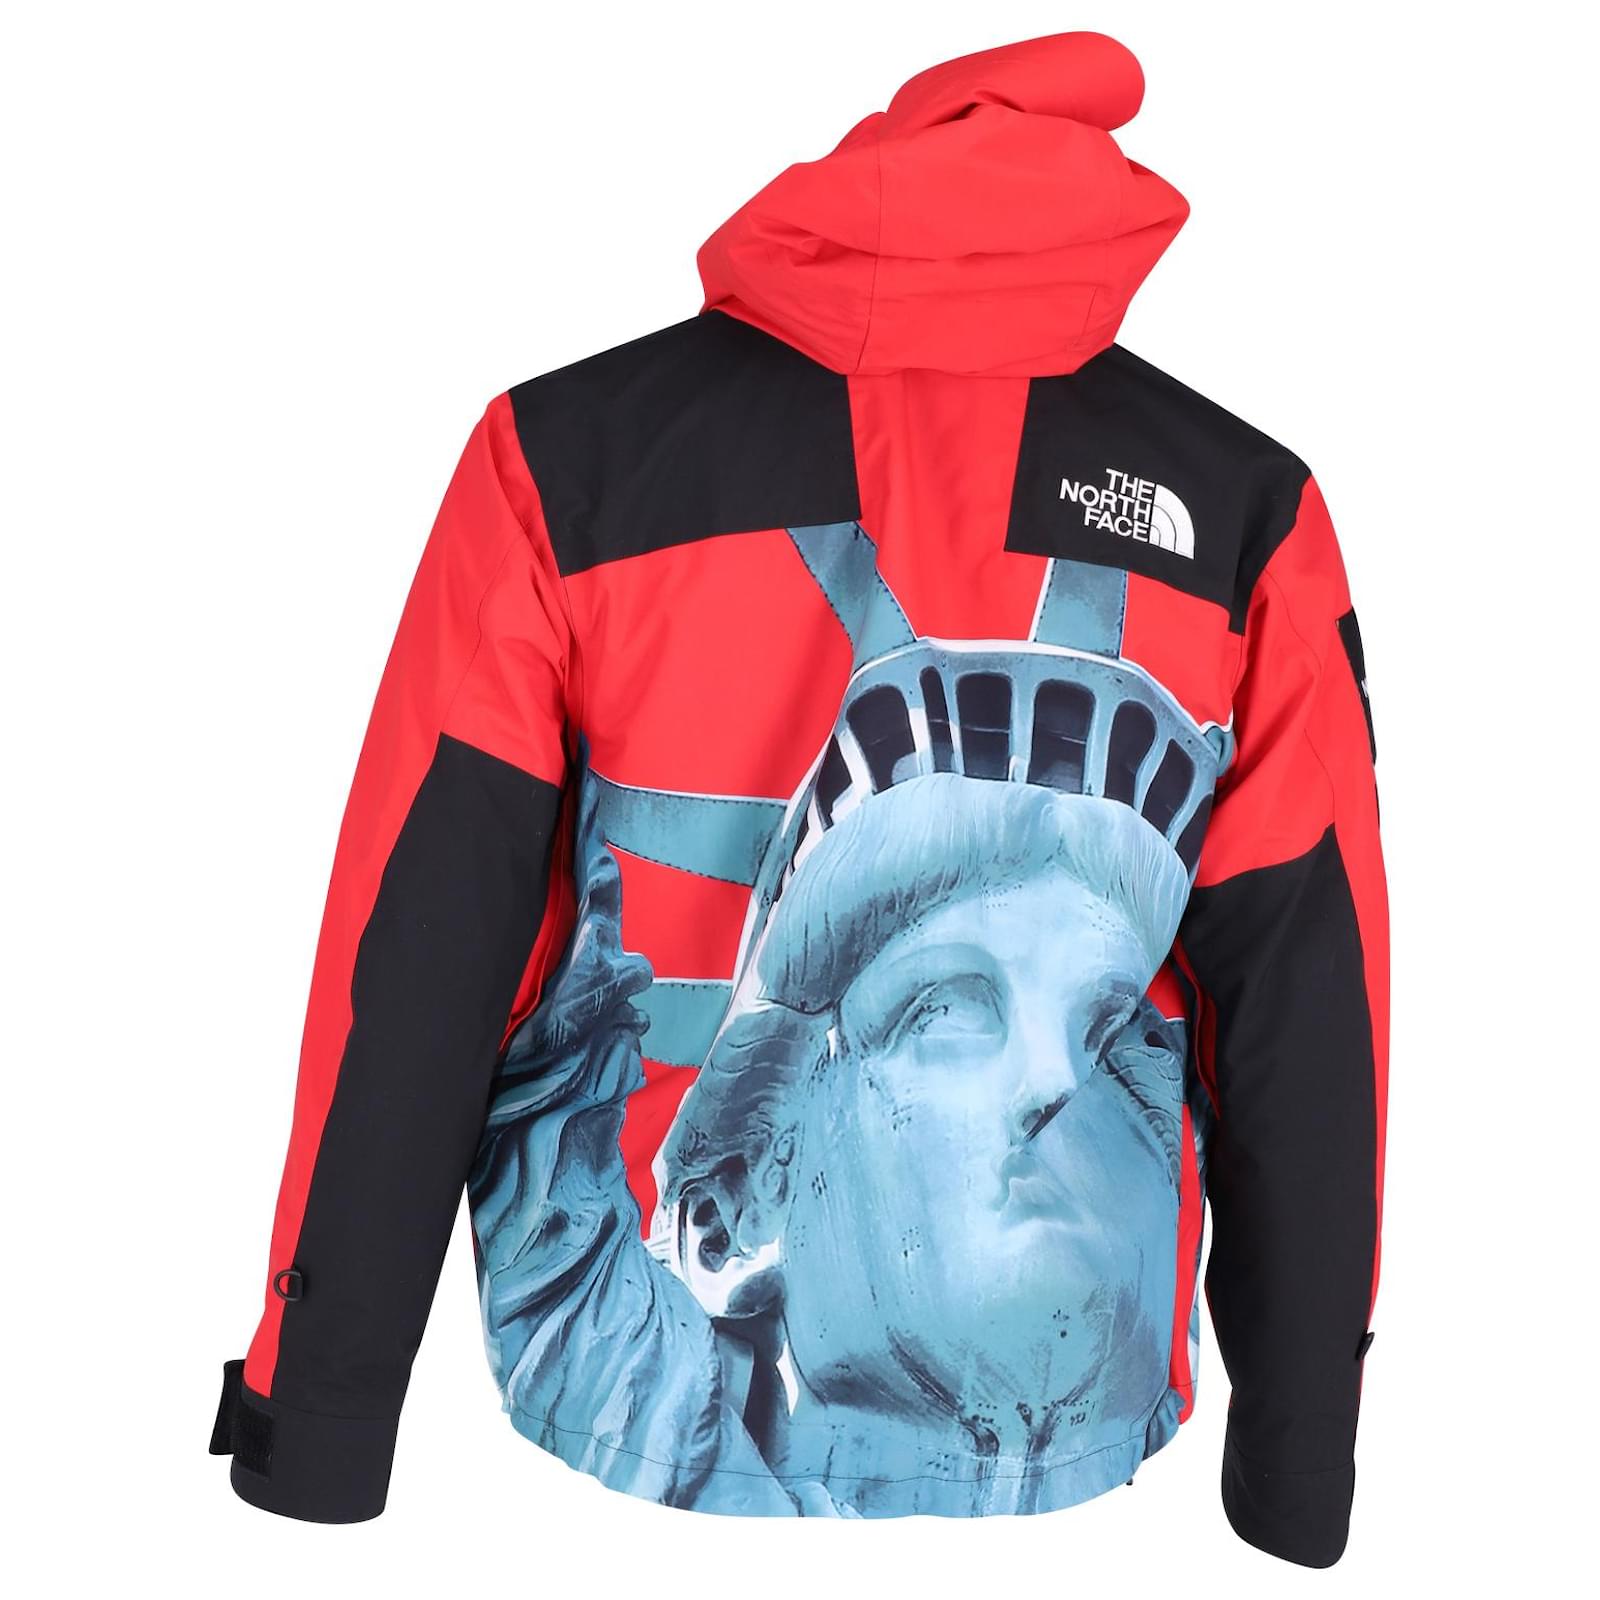 Supreme x The North Face Statue of Liberty Mountain Jacket in Red 